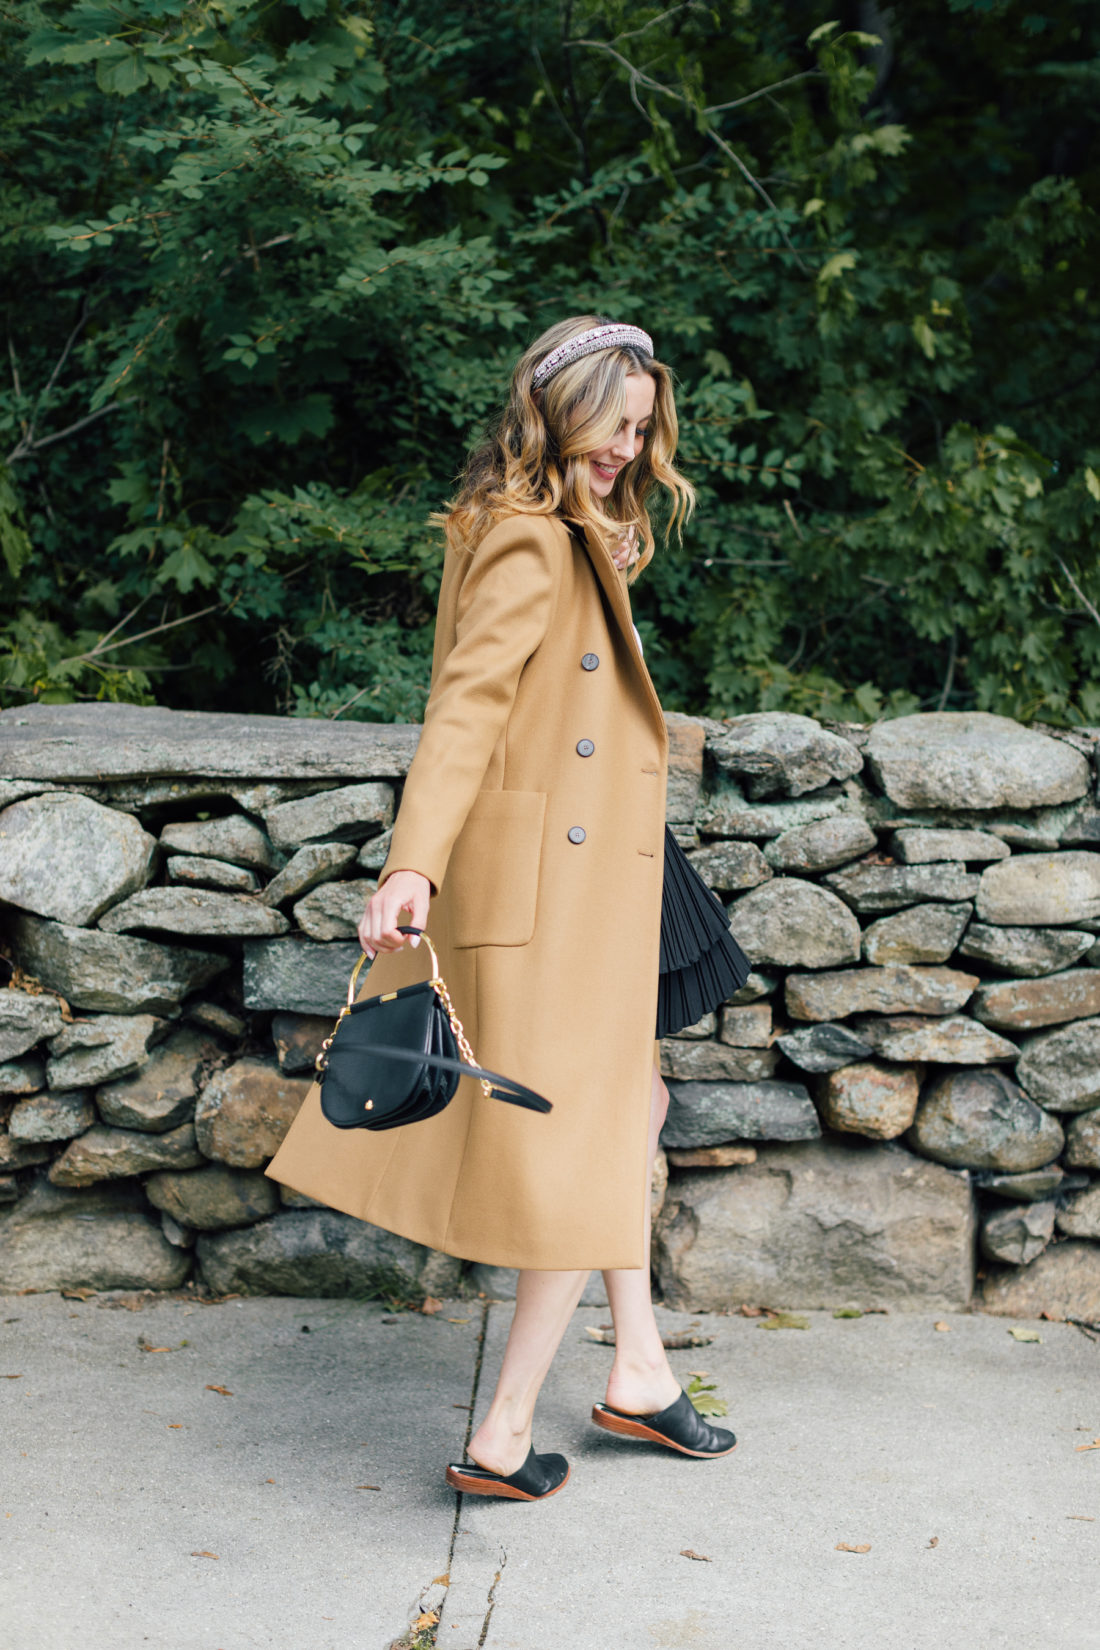 Eva Amurri Martino wears a camel coat, a black skirt and a white top as a neutral color palette